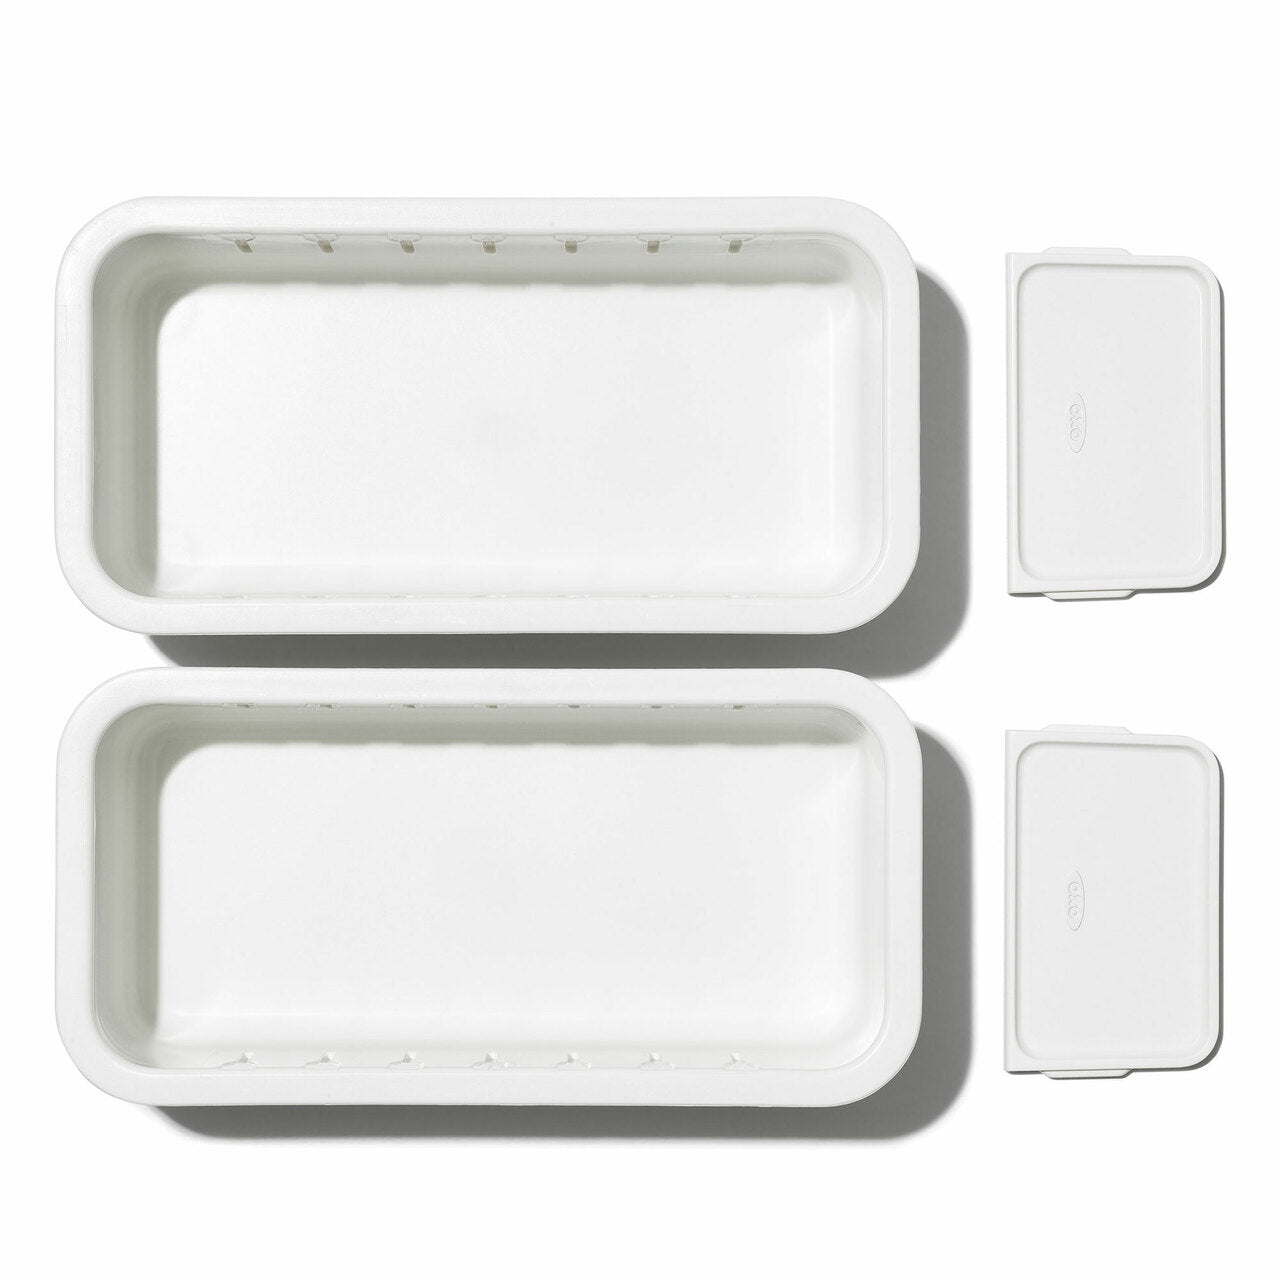 Oxo Drawer Bin Set of 2 Pieces